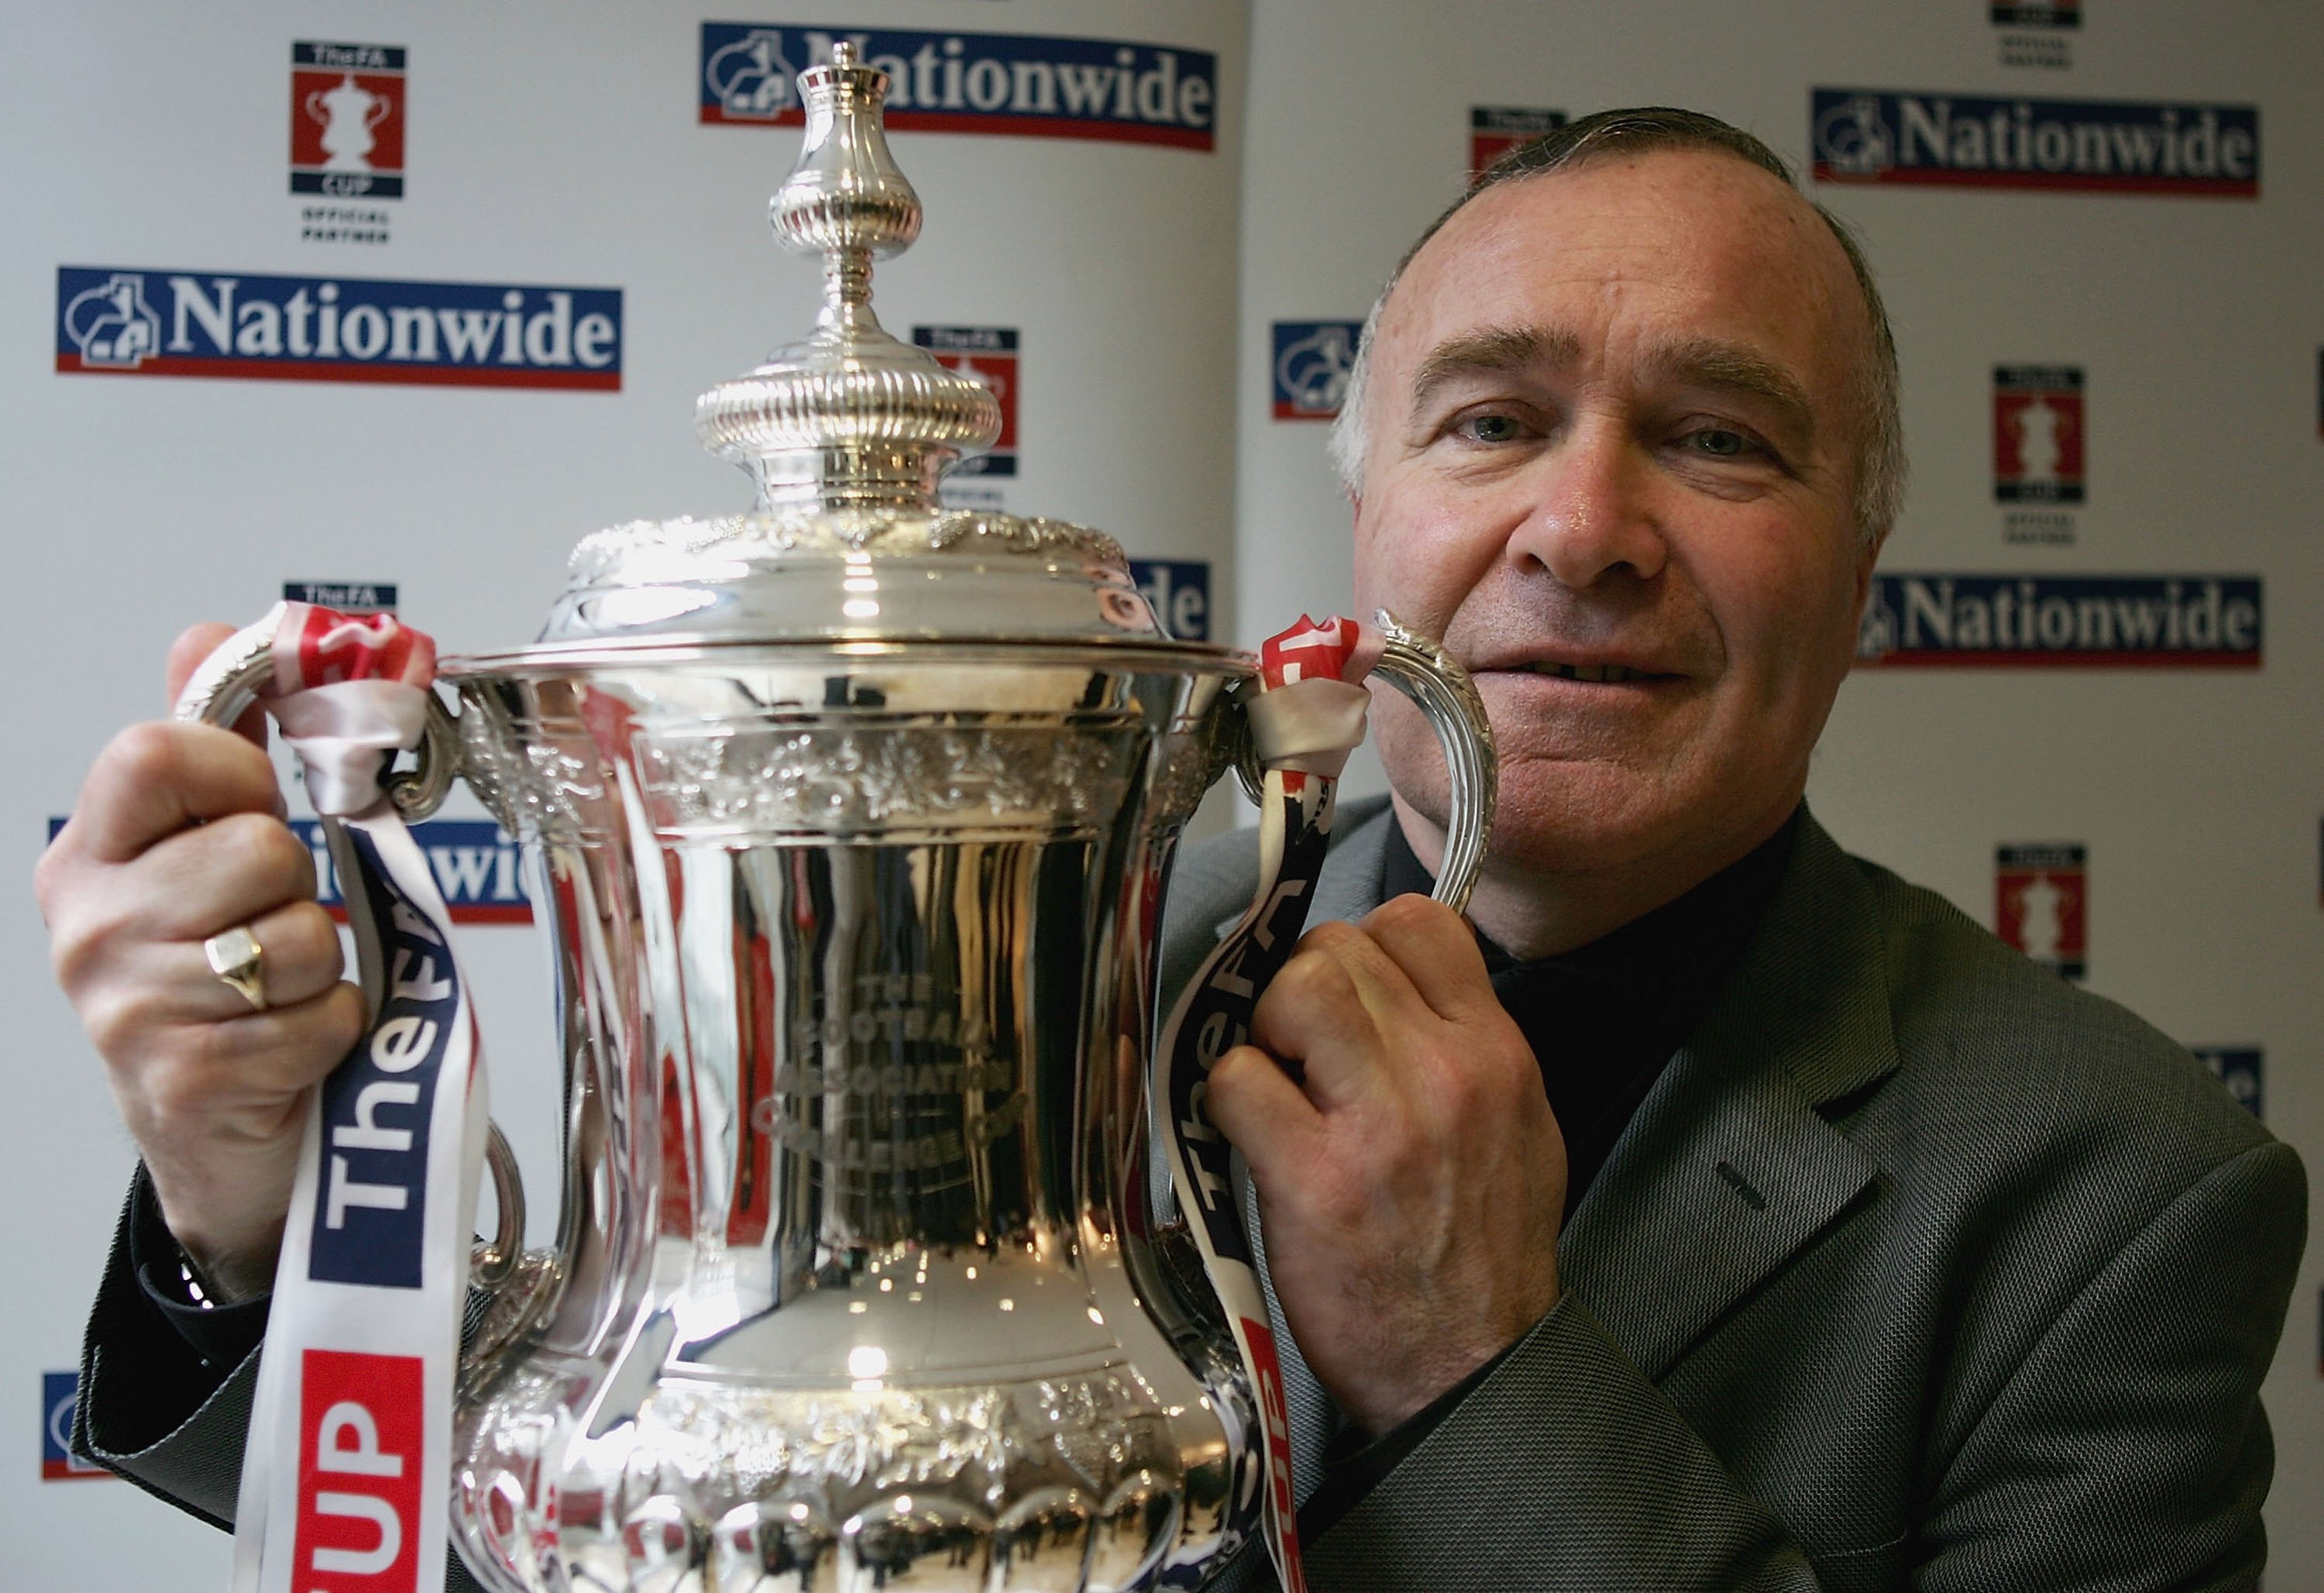 LONDON - FEBRUARY 15:  Former Chelsea player Ron Harris poses with the FA Cup ahead of this weekend's fourth round of the FA Cup at a Nationwide branch on February 15, 2006 in London, England.  (Photo by Paul Gilham/Getty Images)